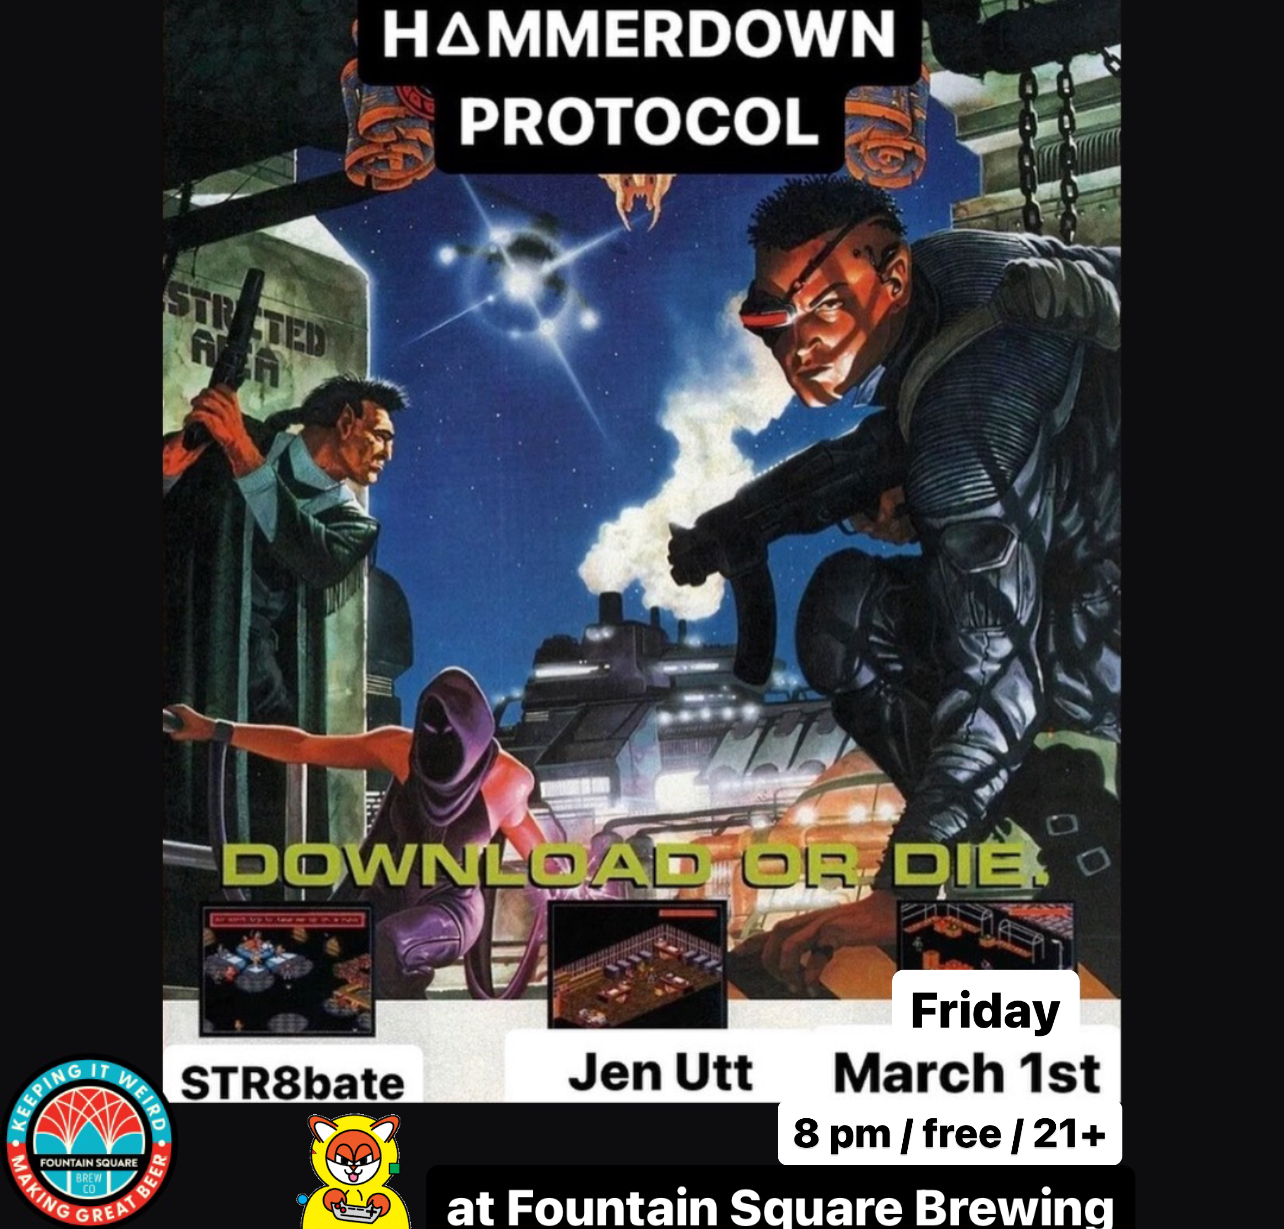 First Friday at Fountain Square Brewing has new art and free performances from Hammerdown Protocol, Jen Utt, and str8BATE. This free show is 21+ and starts at 8 pm